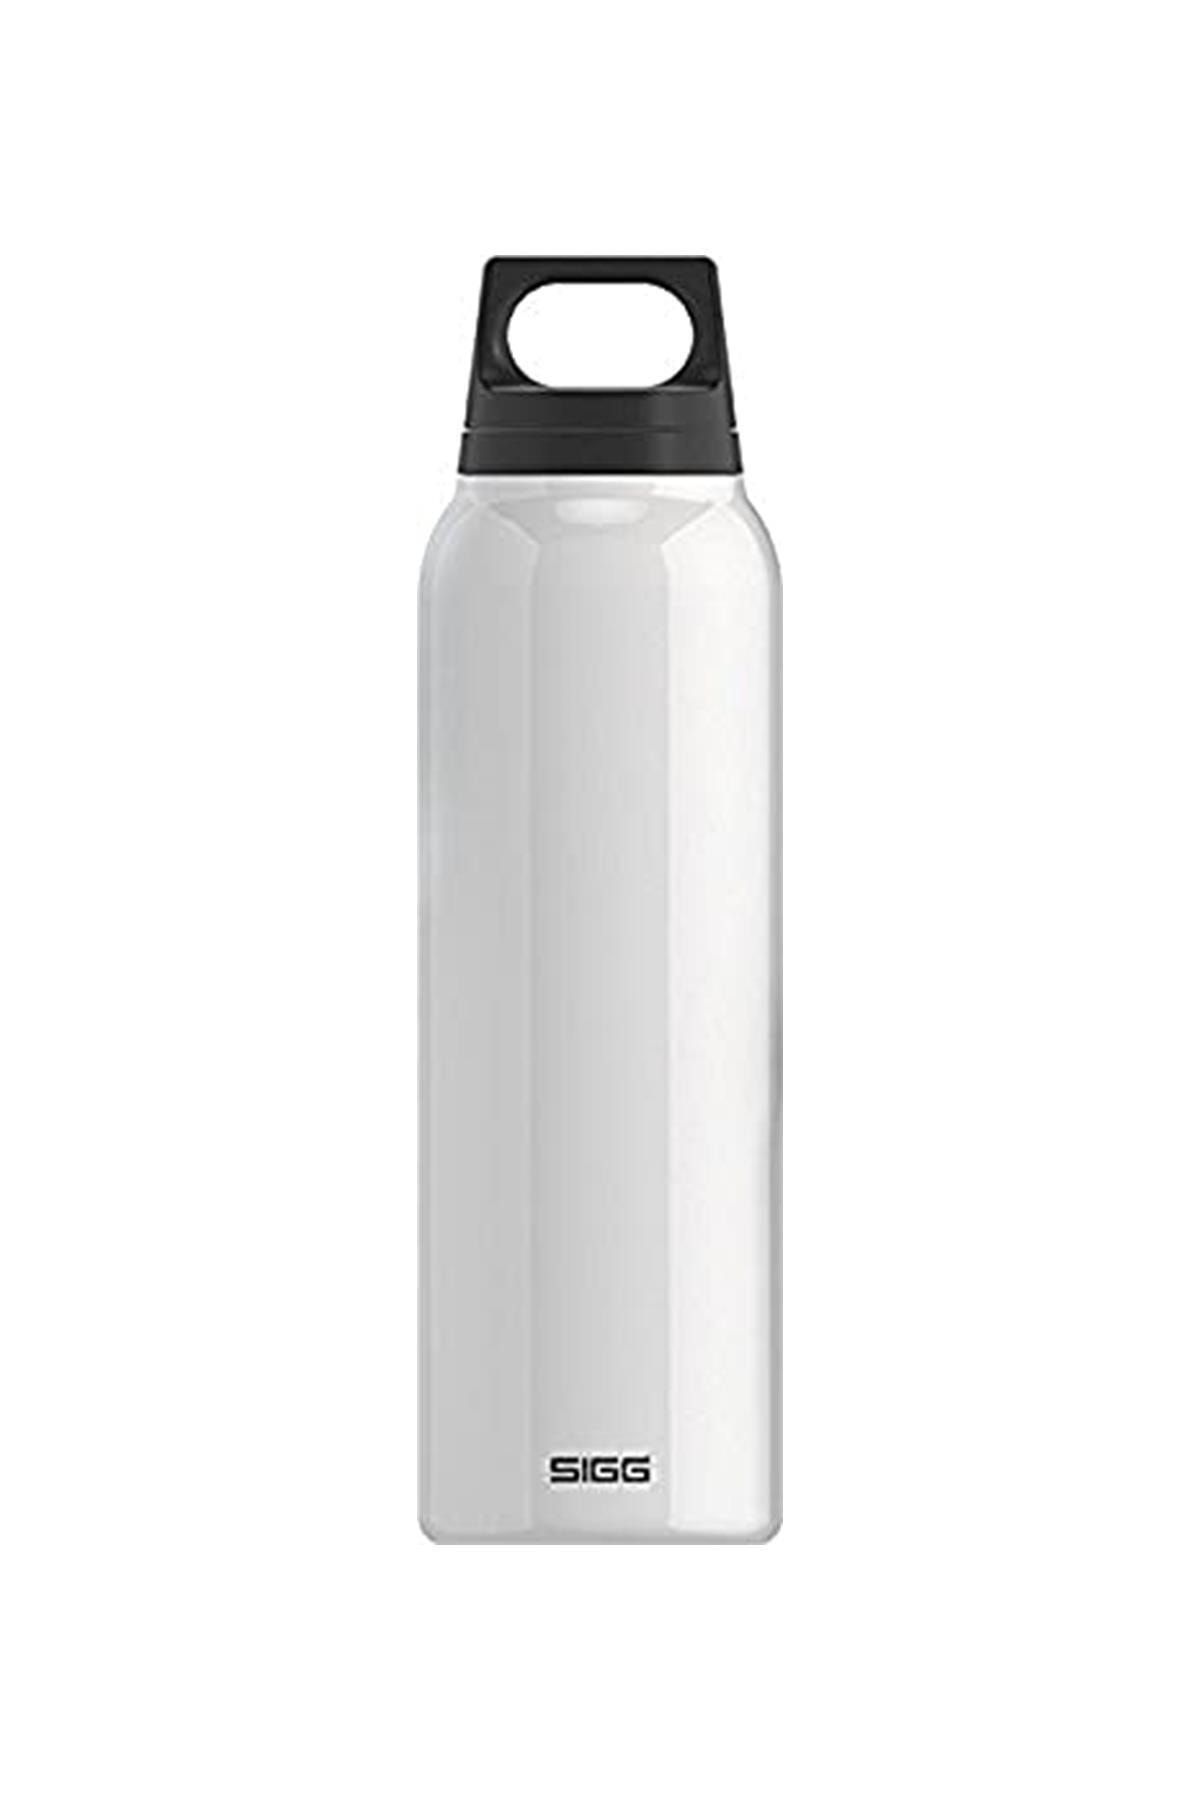 Sigg 8448.10 Thermo Flask Hot&cold 0.5 Lt Termos